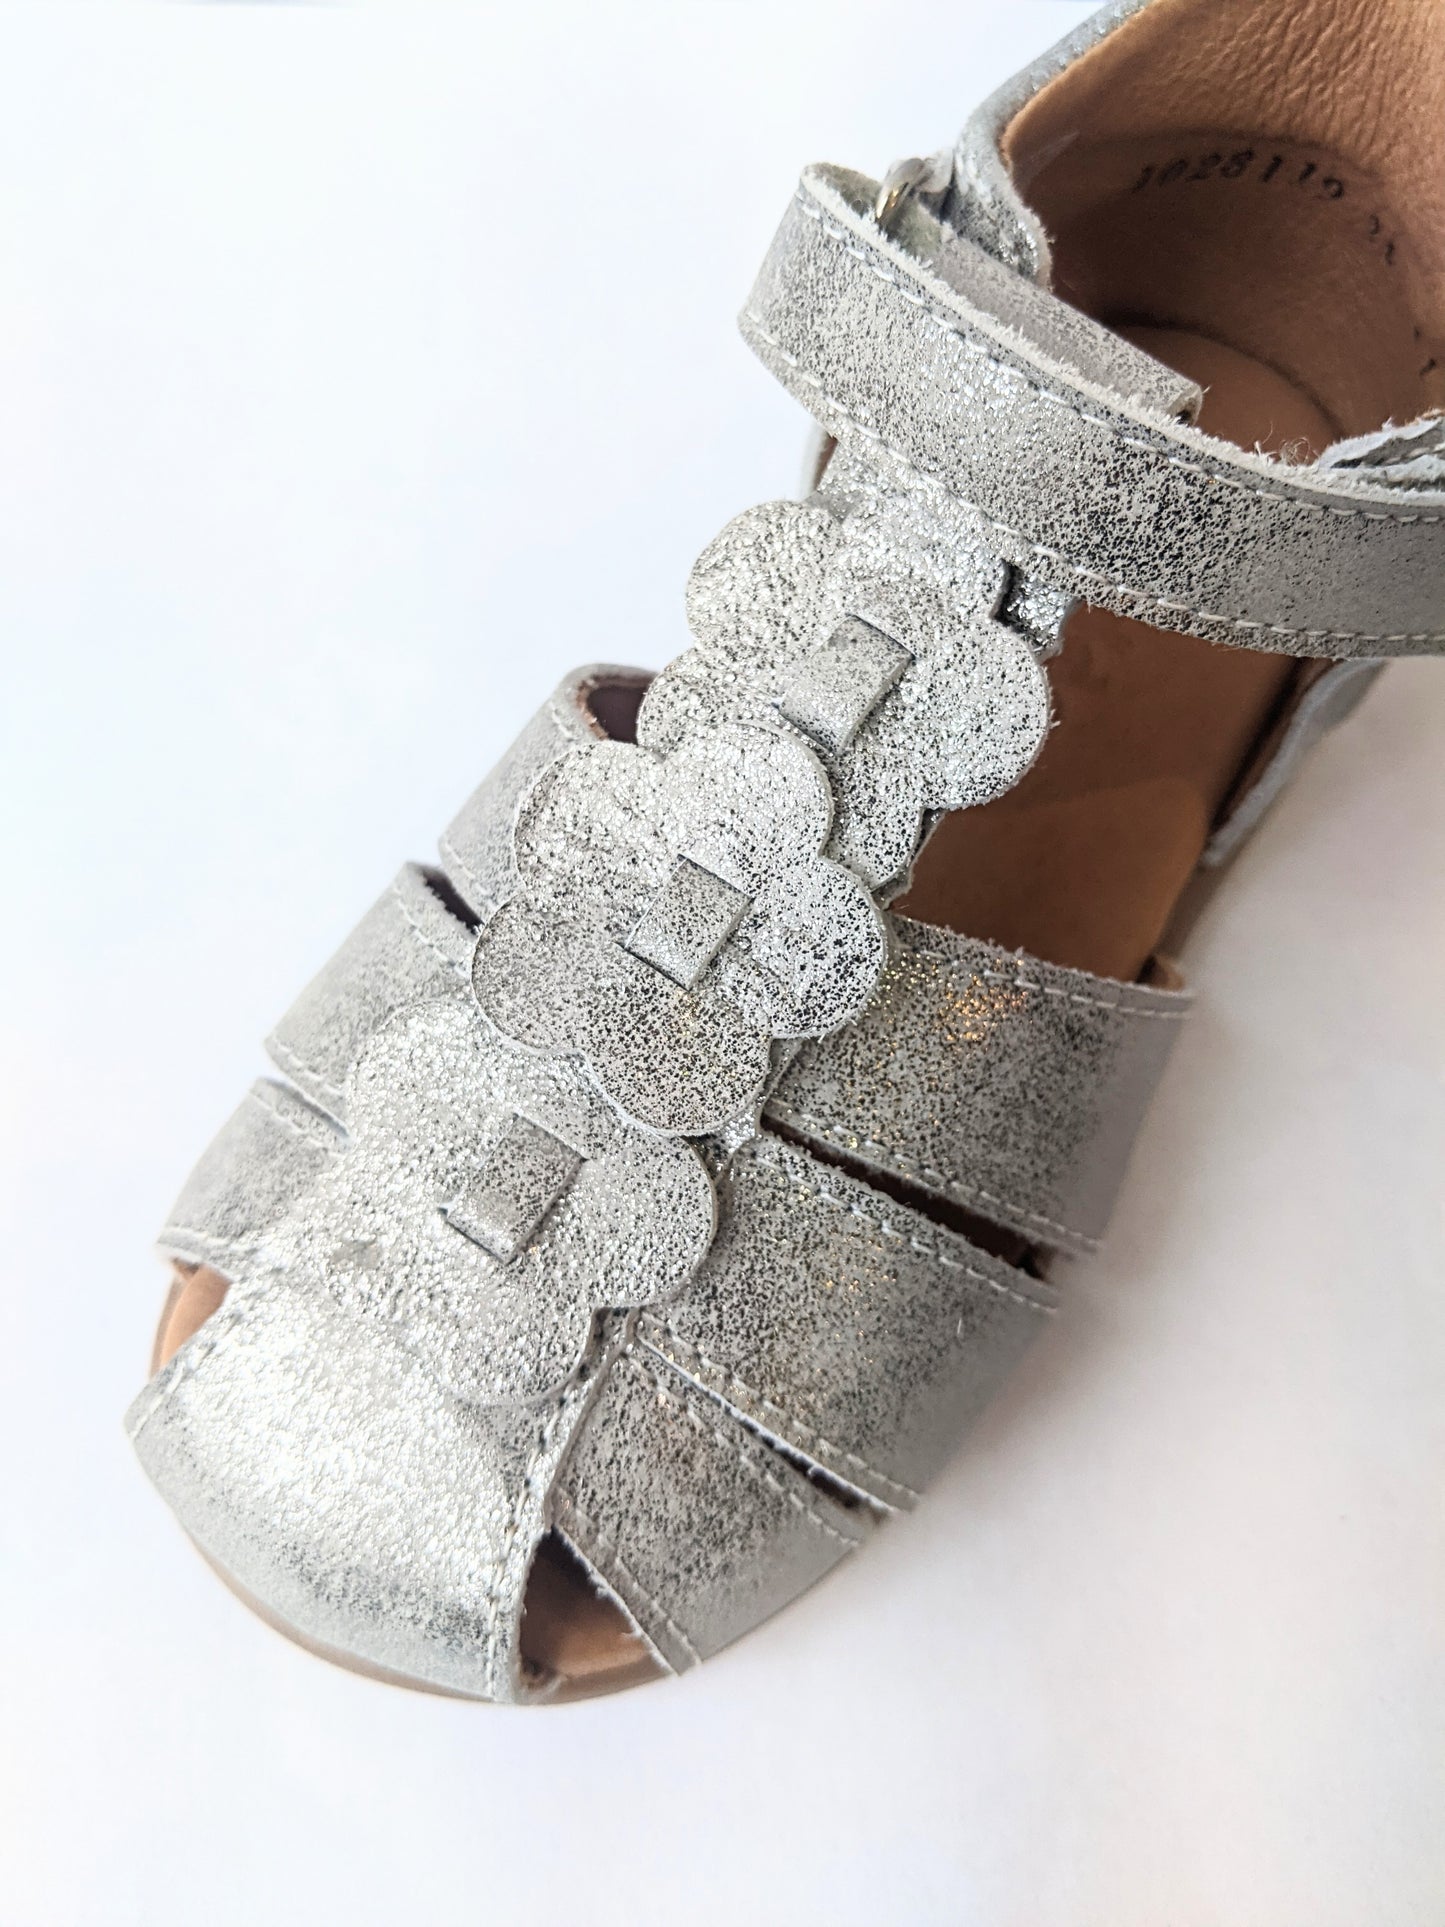 A girls closed toe sandal by Froddo, style G2150094-5, in silver with velcro fastening. Top view.